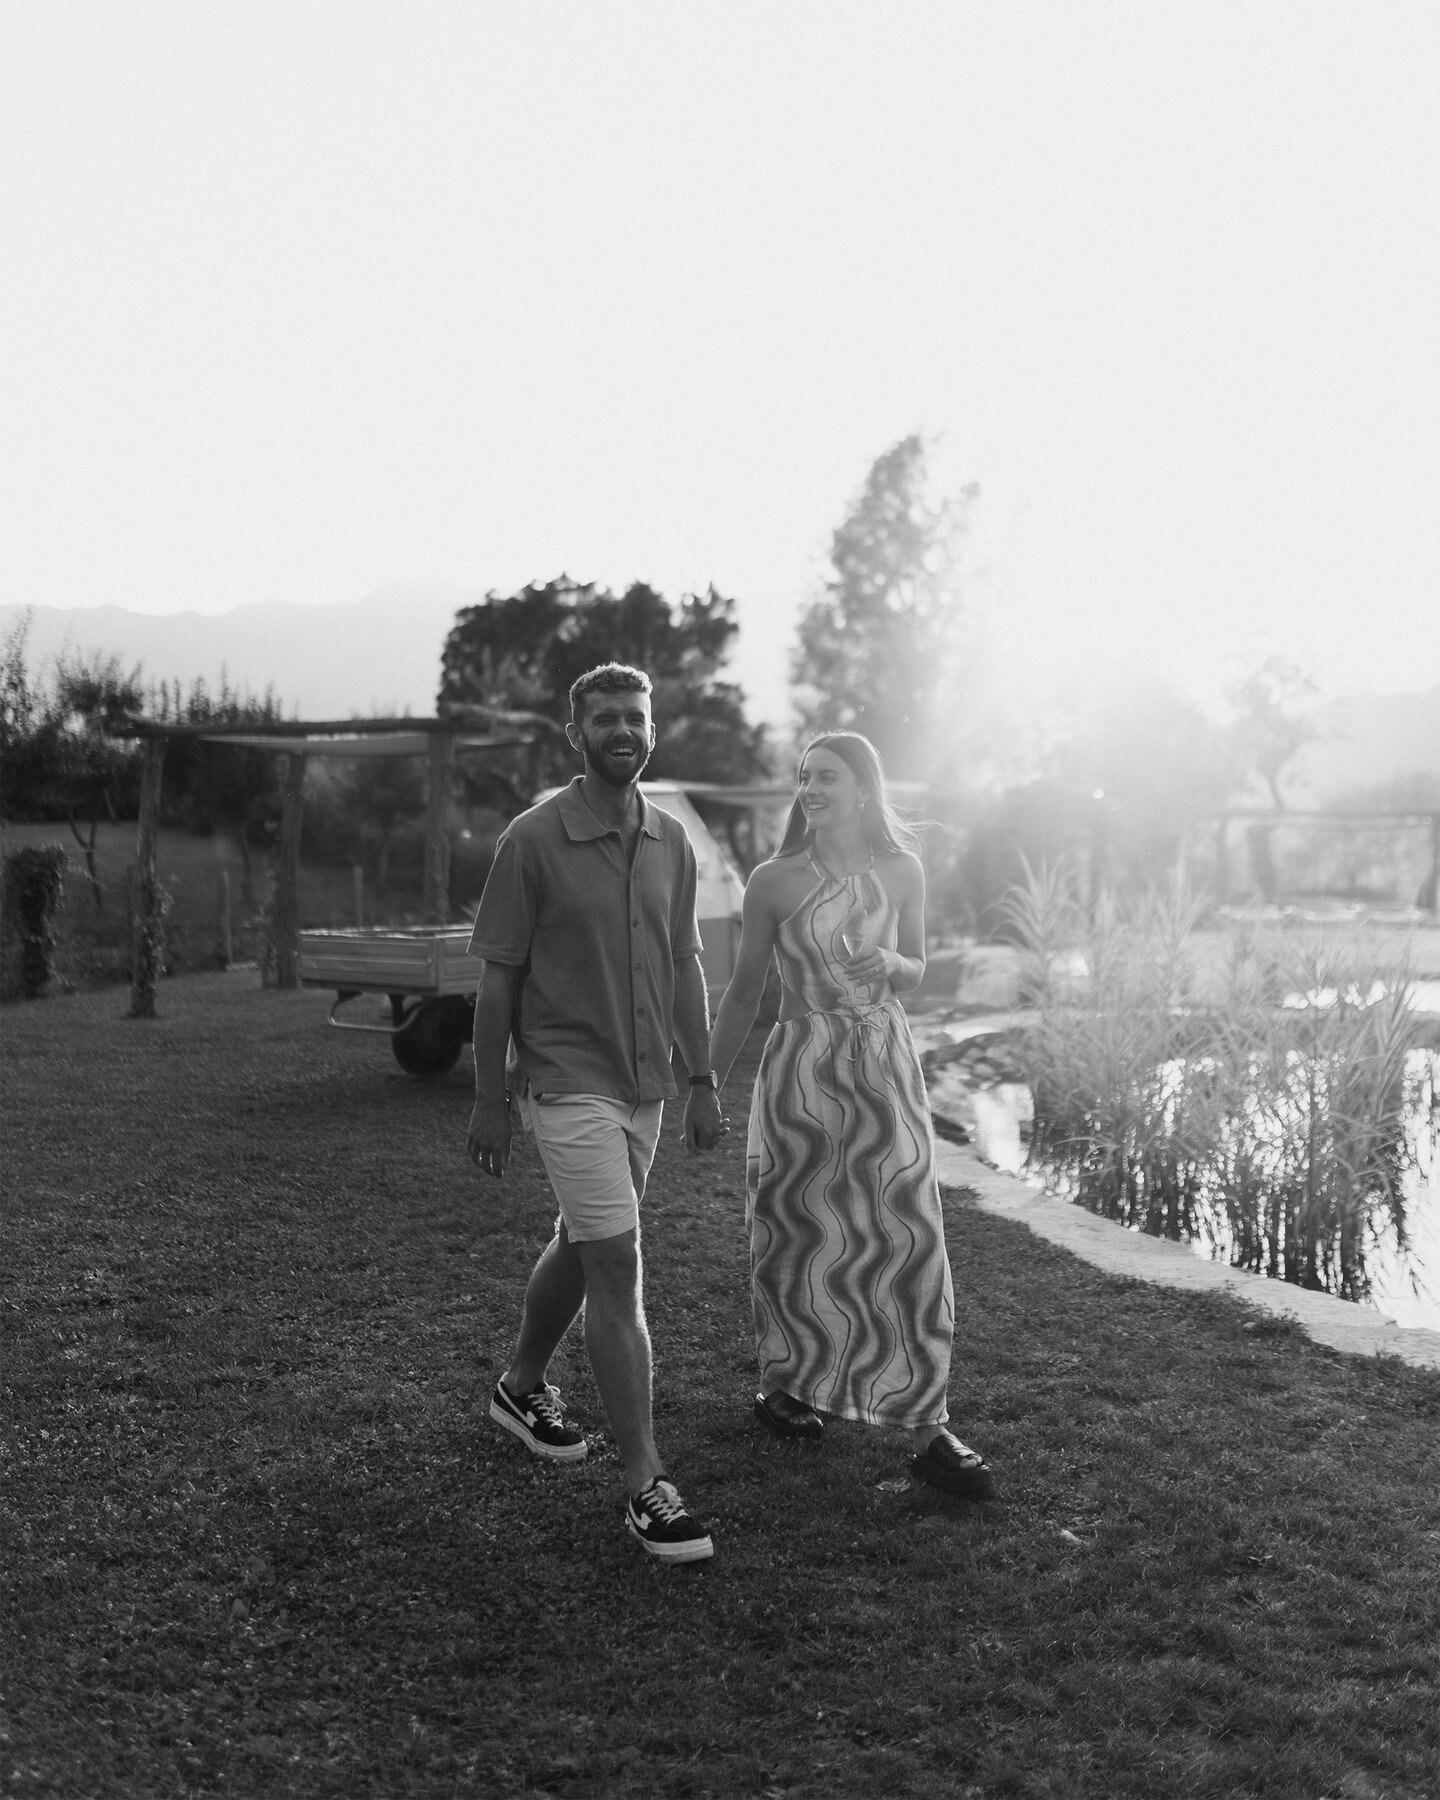 Those Italian pre-wedding pizza and prosecco vibes with Becky &amp; Perry⁠
⁠
.⁠
⁠
Venue @podereconti⁠
@beckyedwards_⁠
@perrygraham⁠
⁠
.⁠
⁠
#luxurywedding #tuscanywedding #tuscanwedding #tuscanweddingphotographer #tuscanyweddingphotographer #destinati